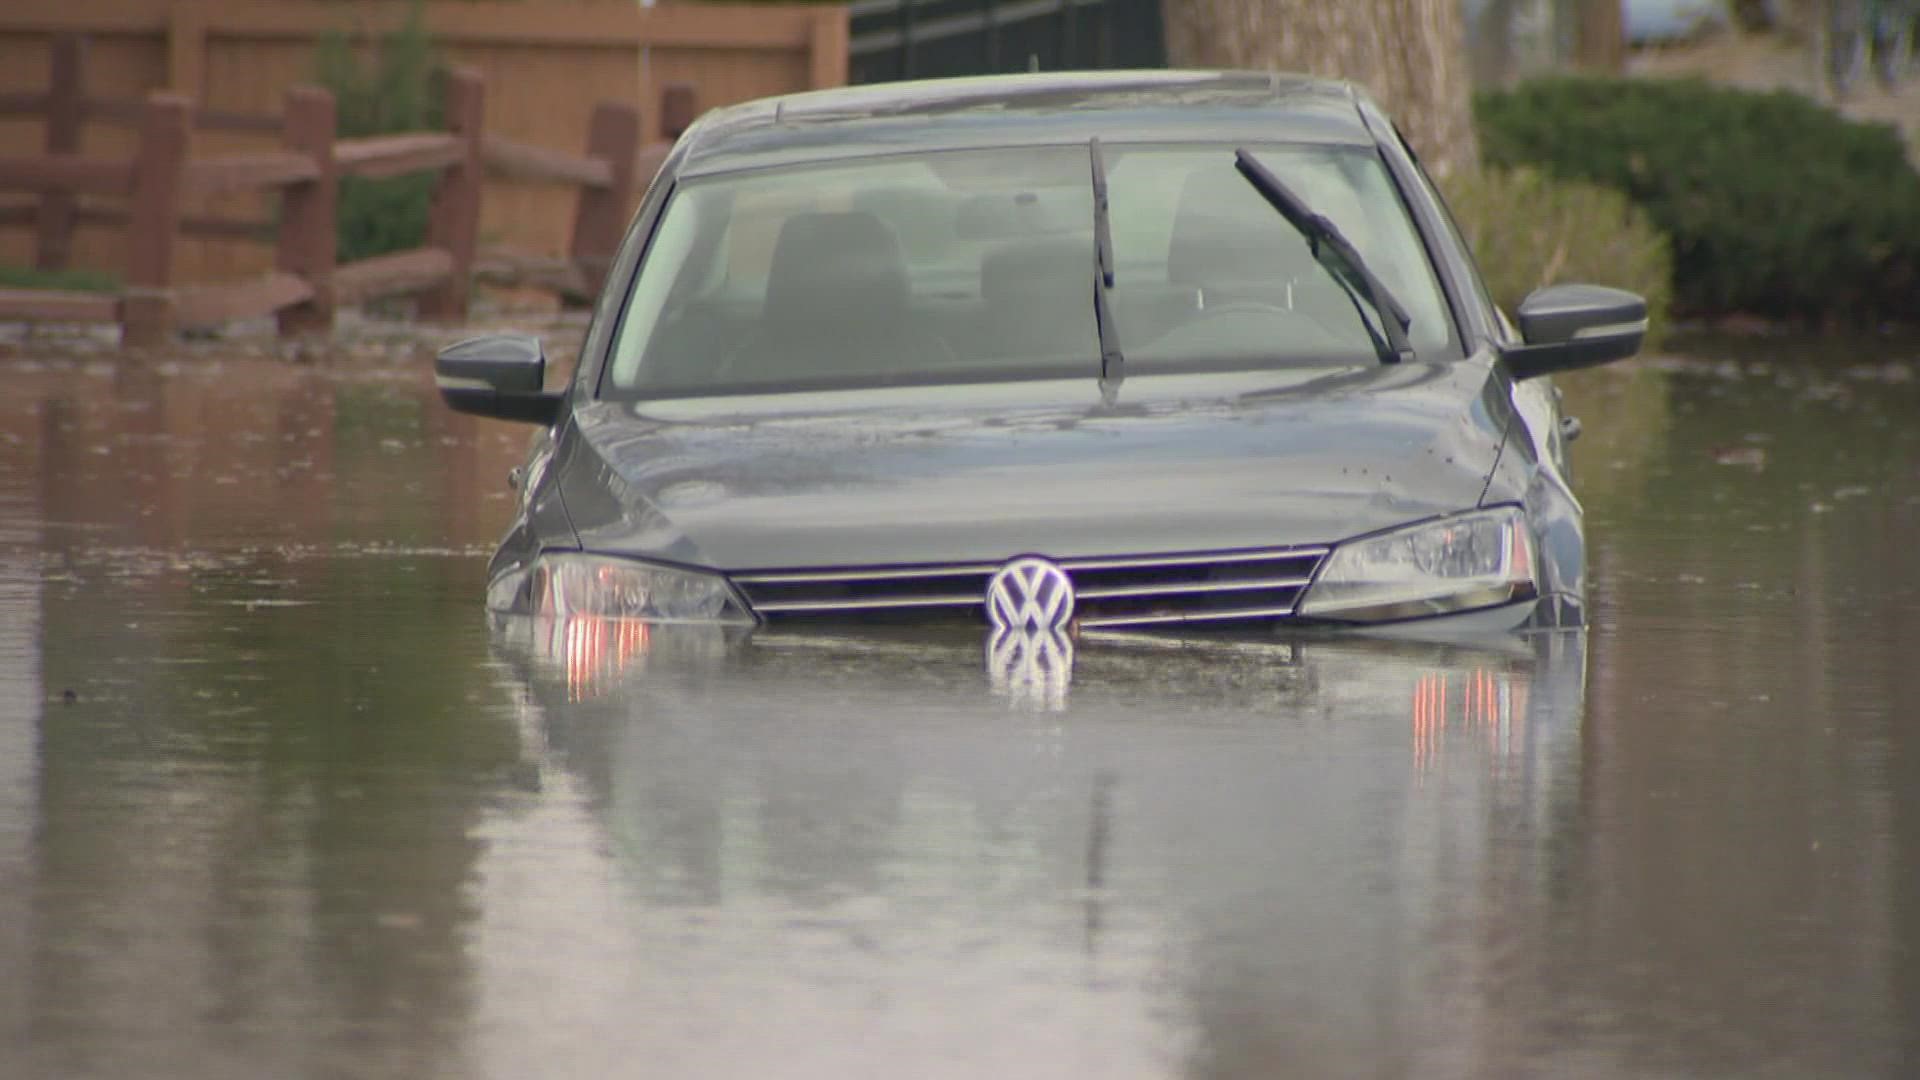 Denver Water said crews faced several obstacles in trying to stop flooding when two pipes burst in the Berkeley neighborhood on Sunday.